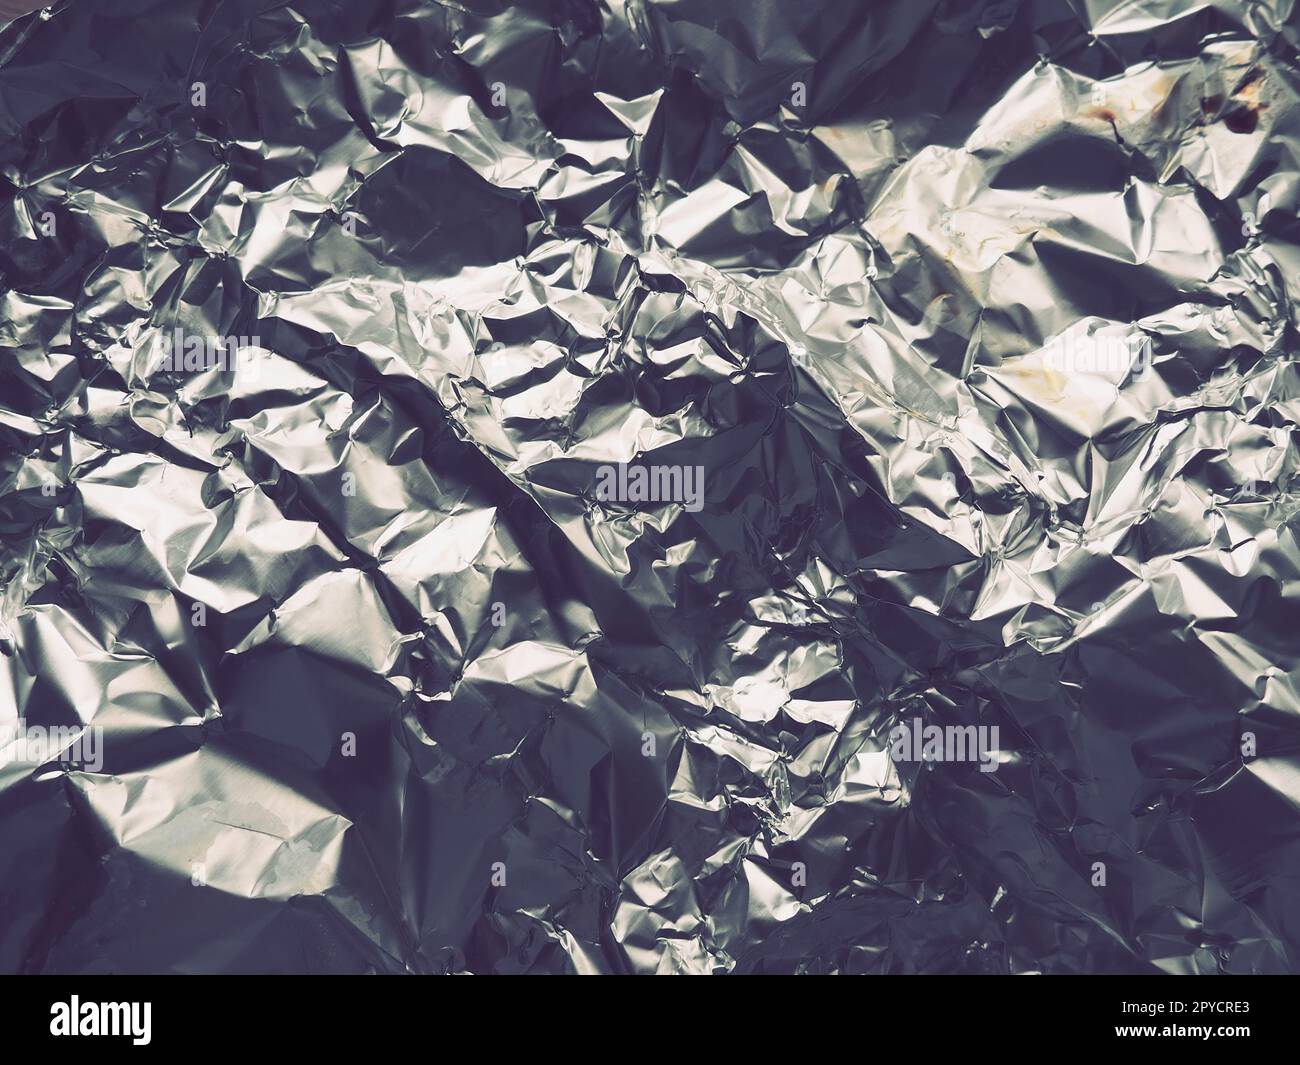 https://c8.alamy.com/comp/2PYCRE3/foil-close-up-aluminum-silver-crumpled-foil-abstract-metallic-background-foil-for-baking-food-background-2PYCRE3.jpg